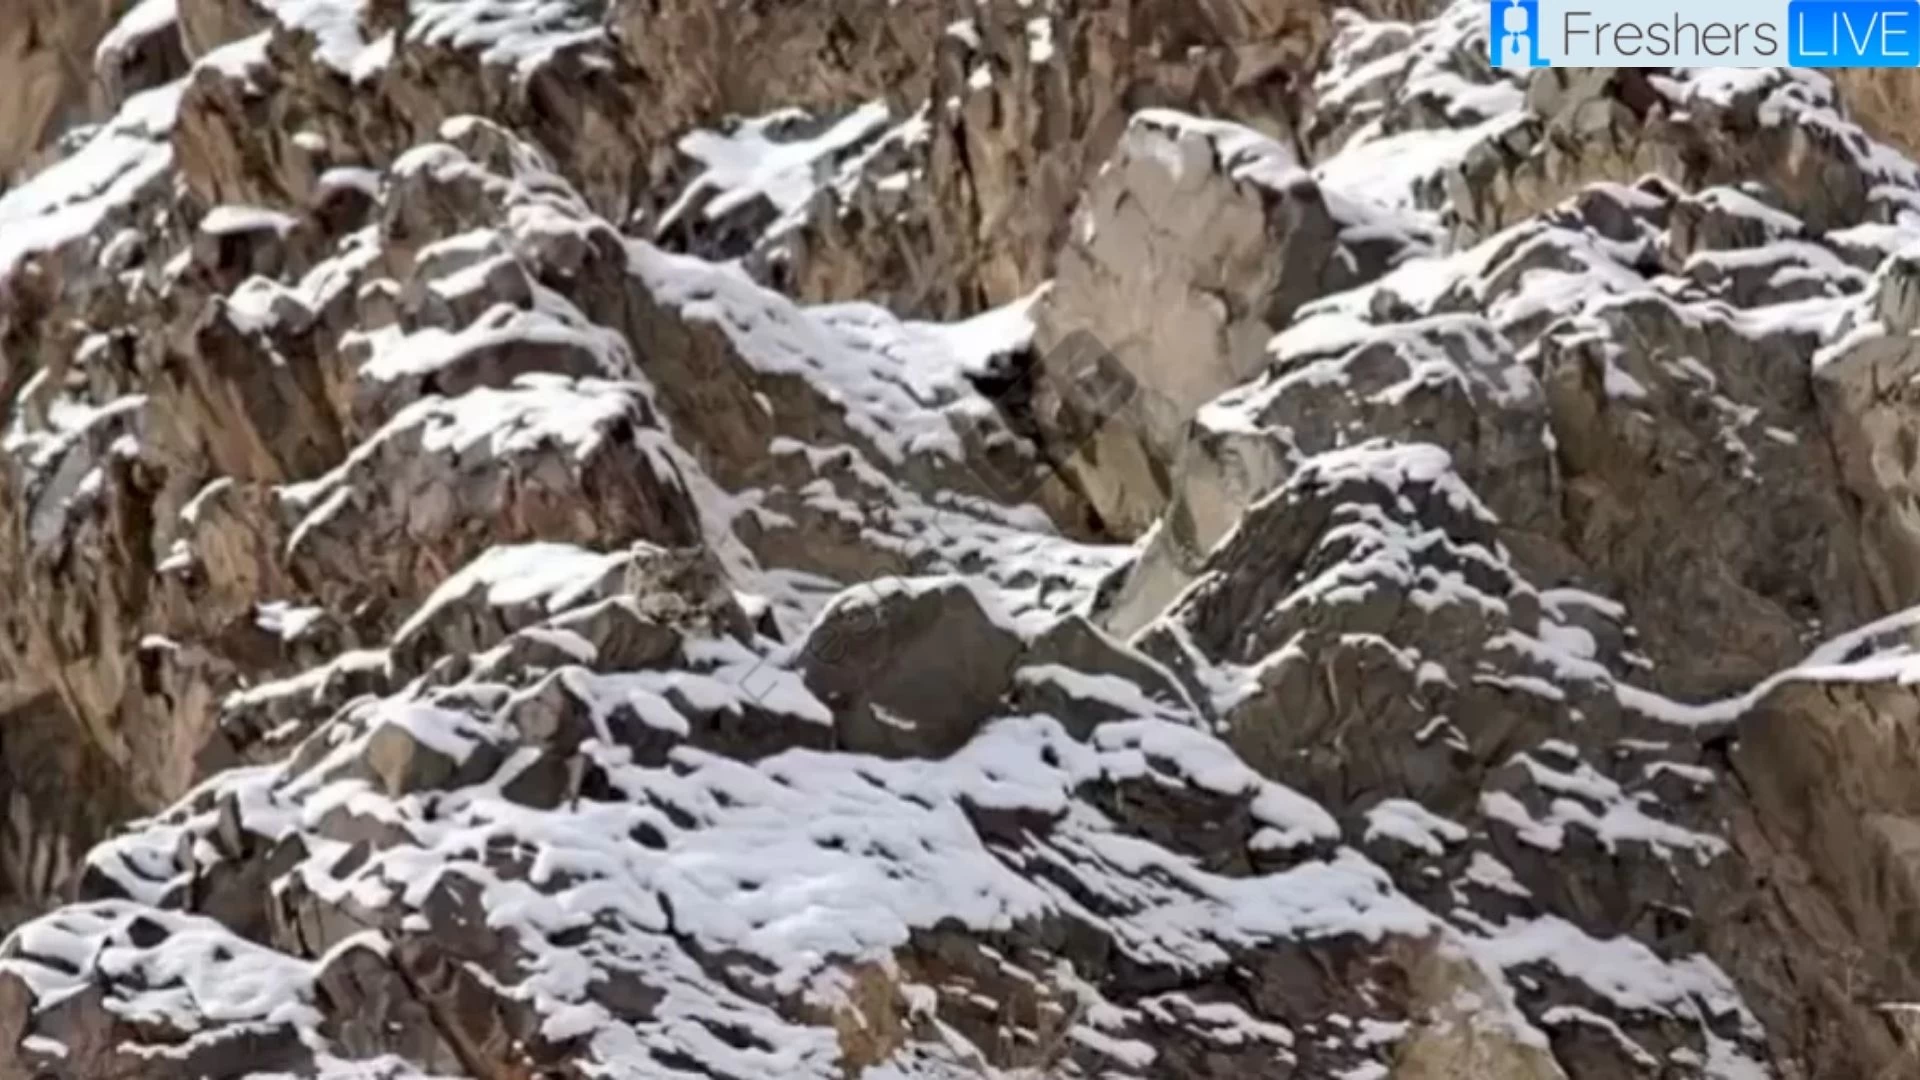 You are a special talent if you can find The Perfectly Camouflaged Snow Leopard in the Image in 10 seconds!